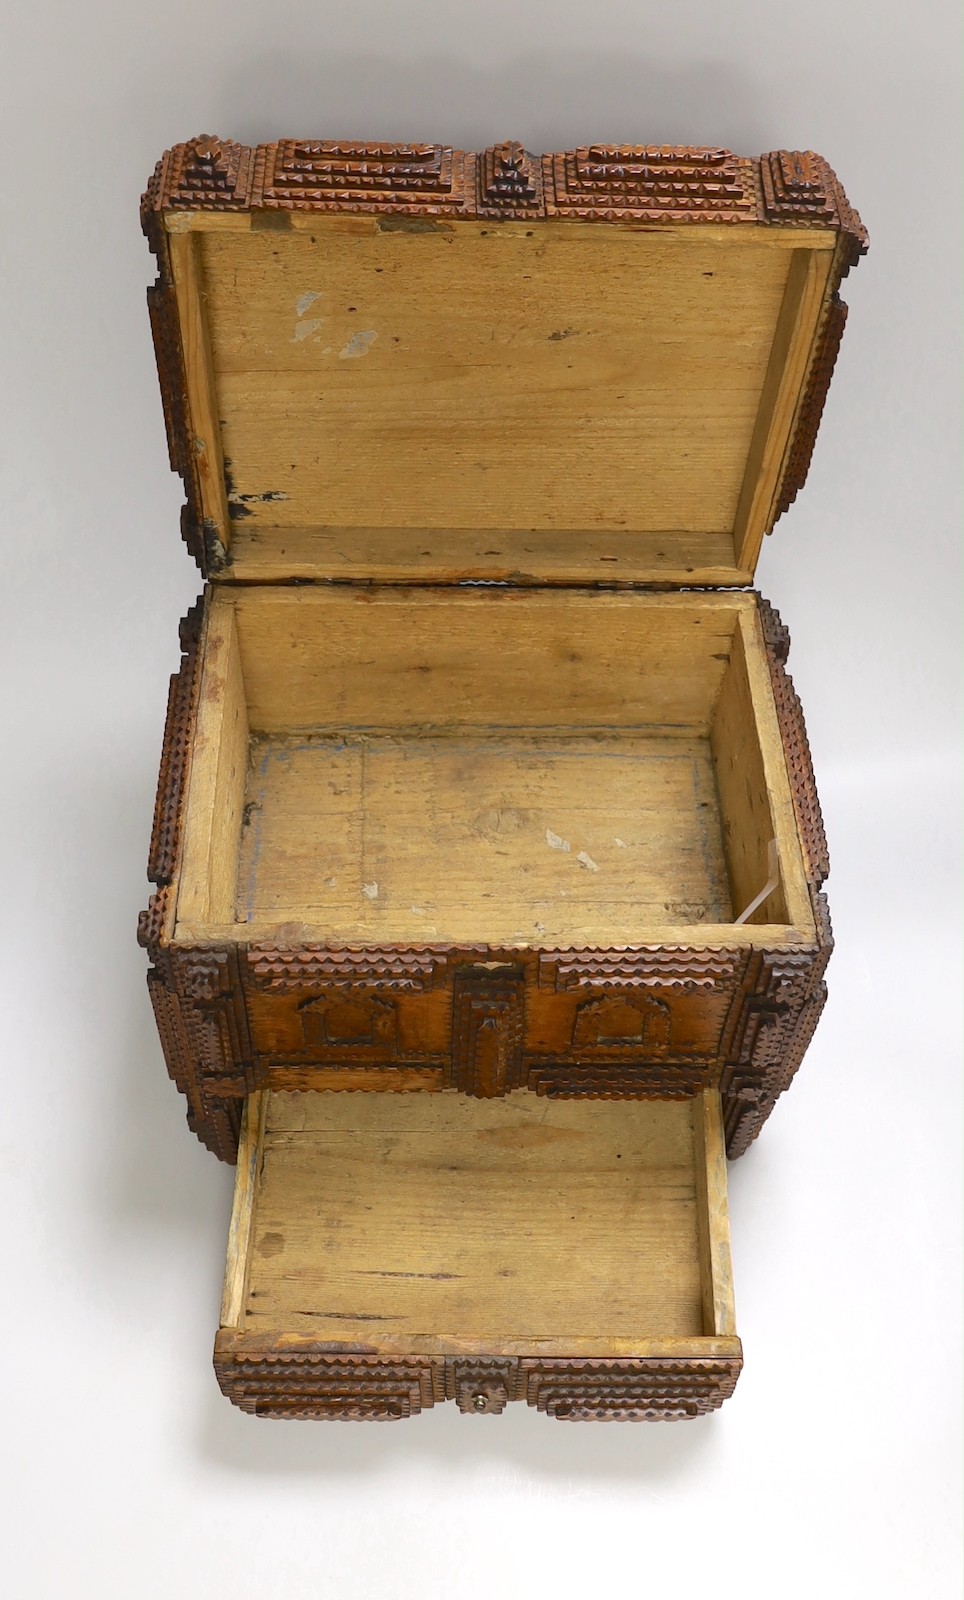 A late 19th century Tramp art elaborately chip-carved wood casket. 24cm high